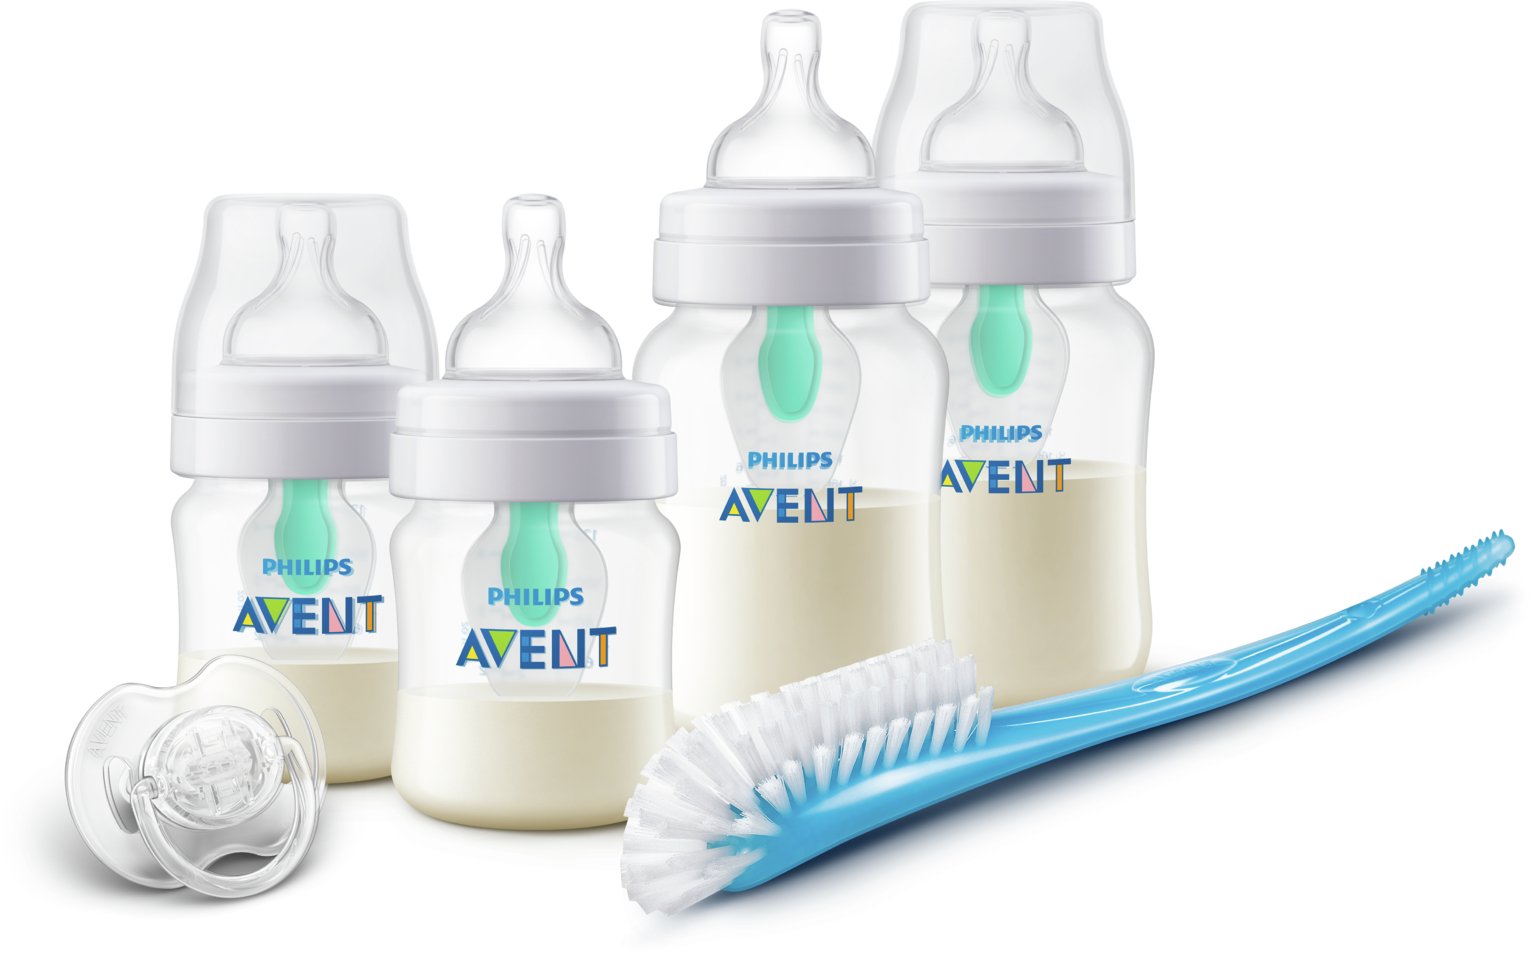 Philips Avent AirFree Vent Anti-Colic Set Bottles 10 pack